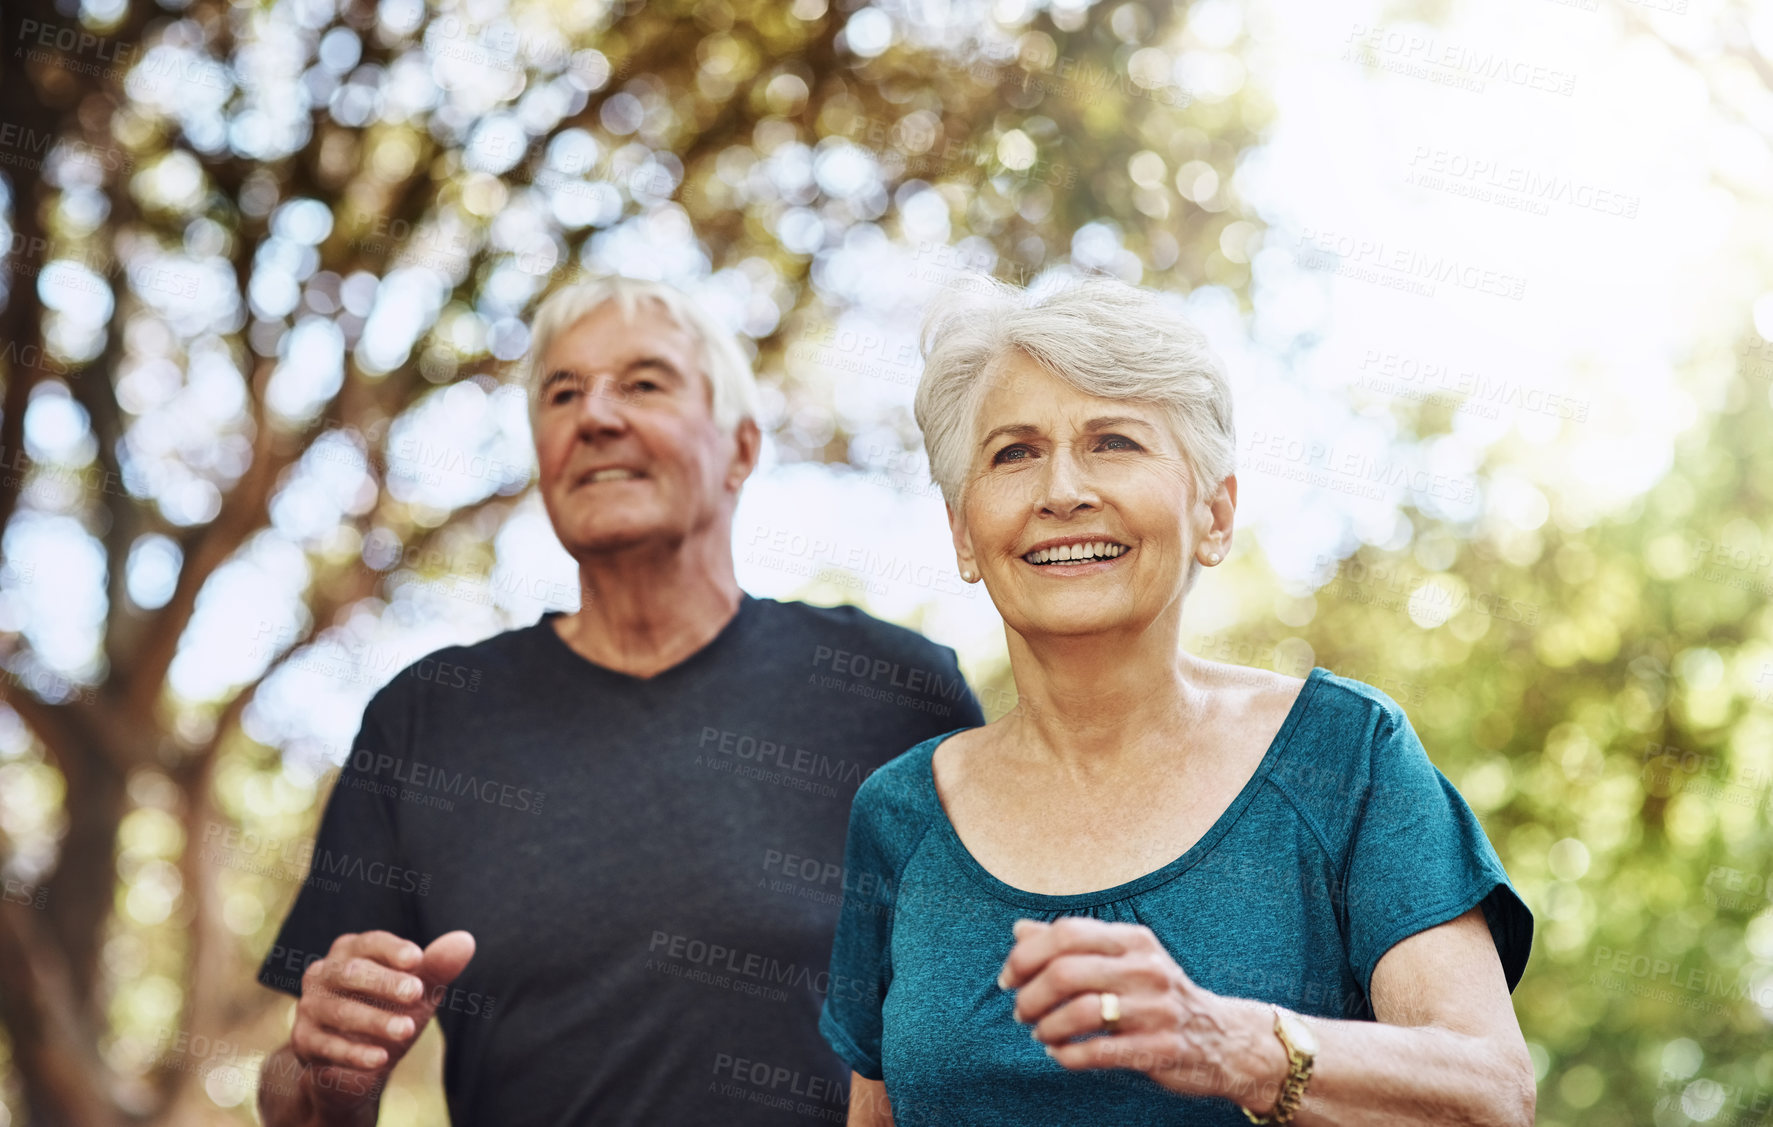 Buy stock photo Shot of a senior couple out for a run together